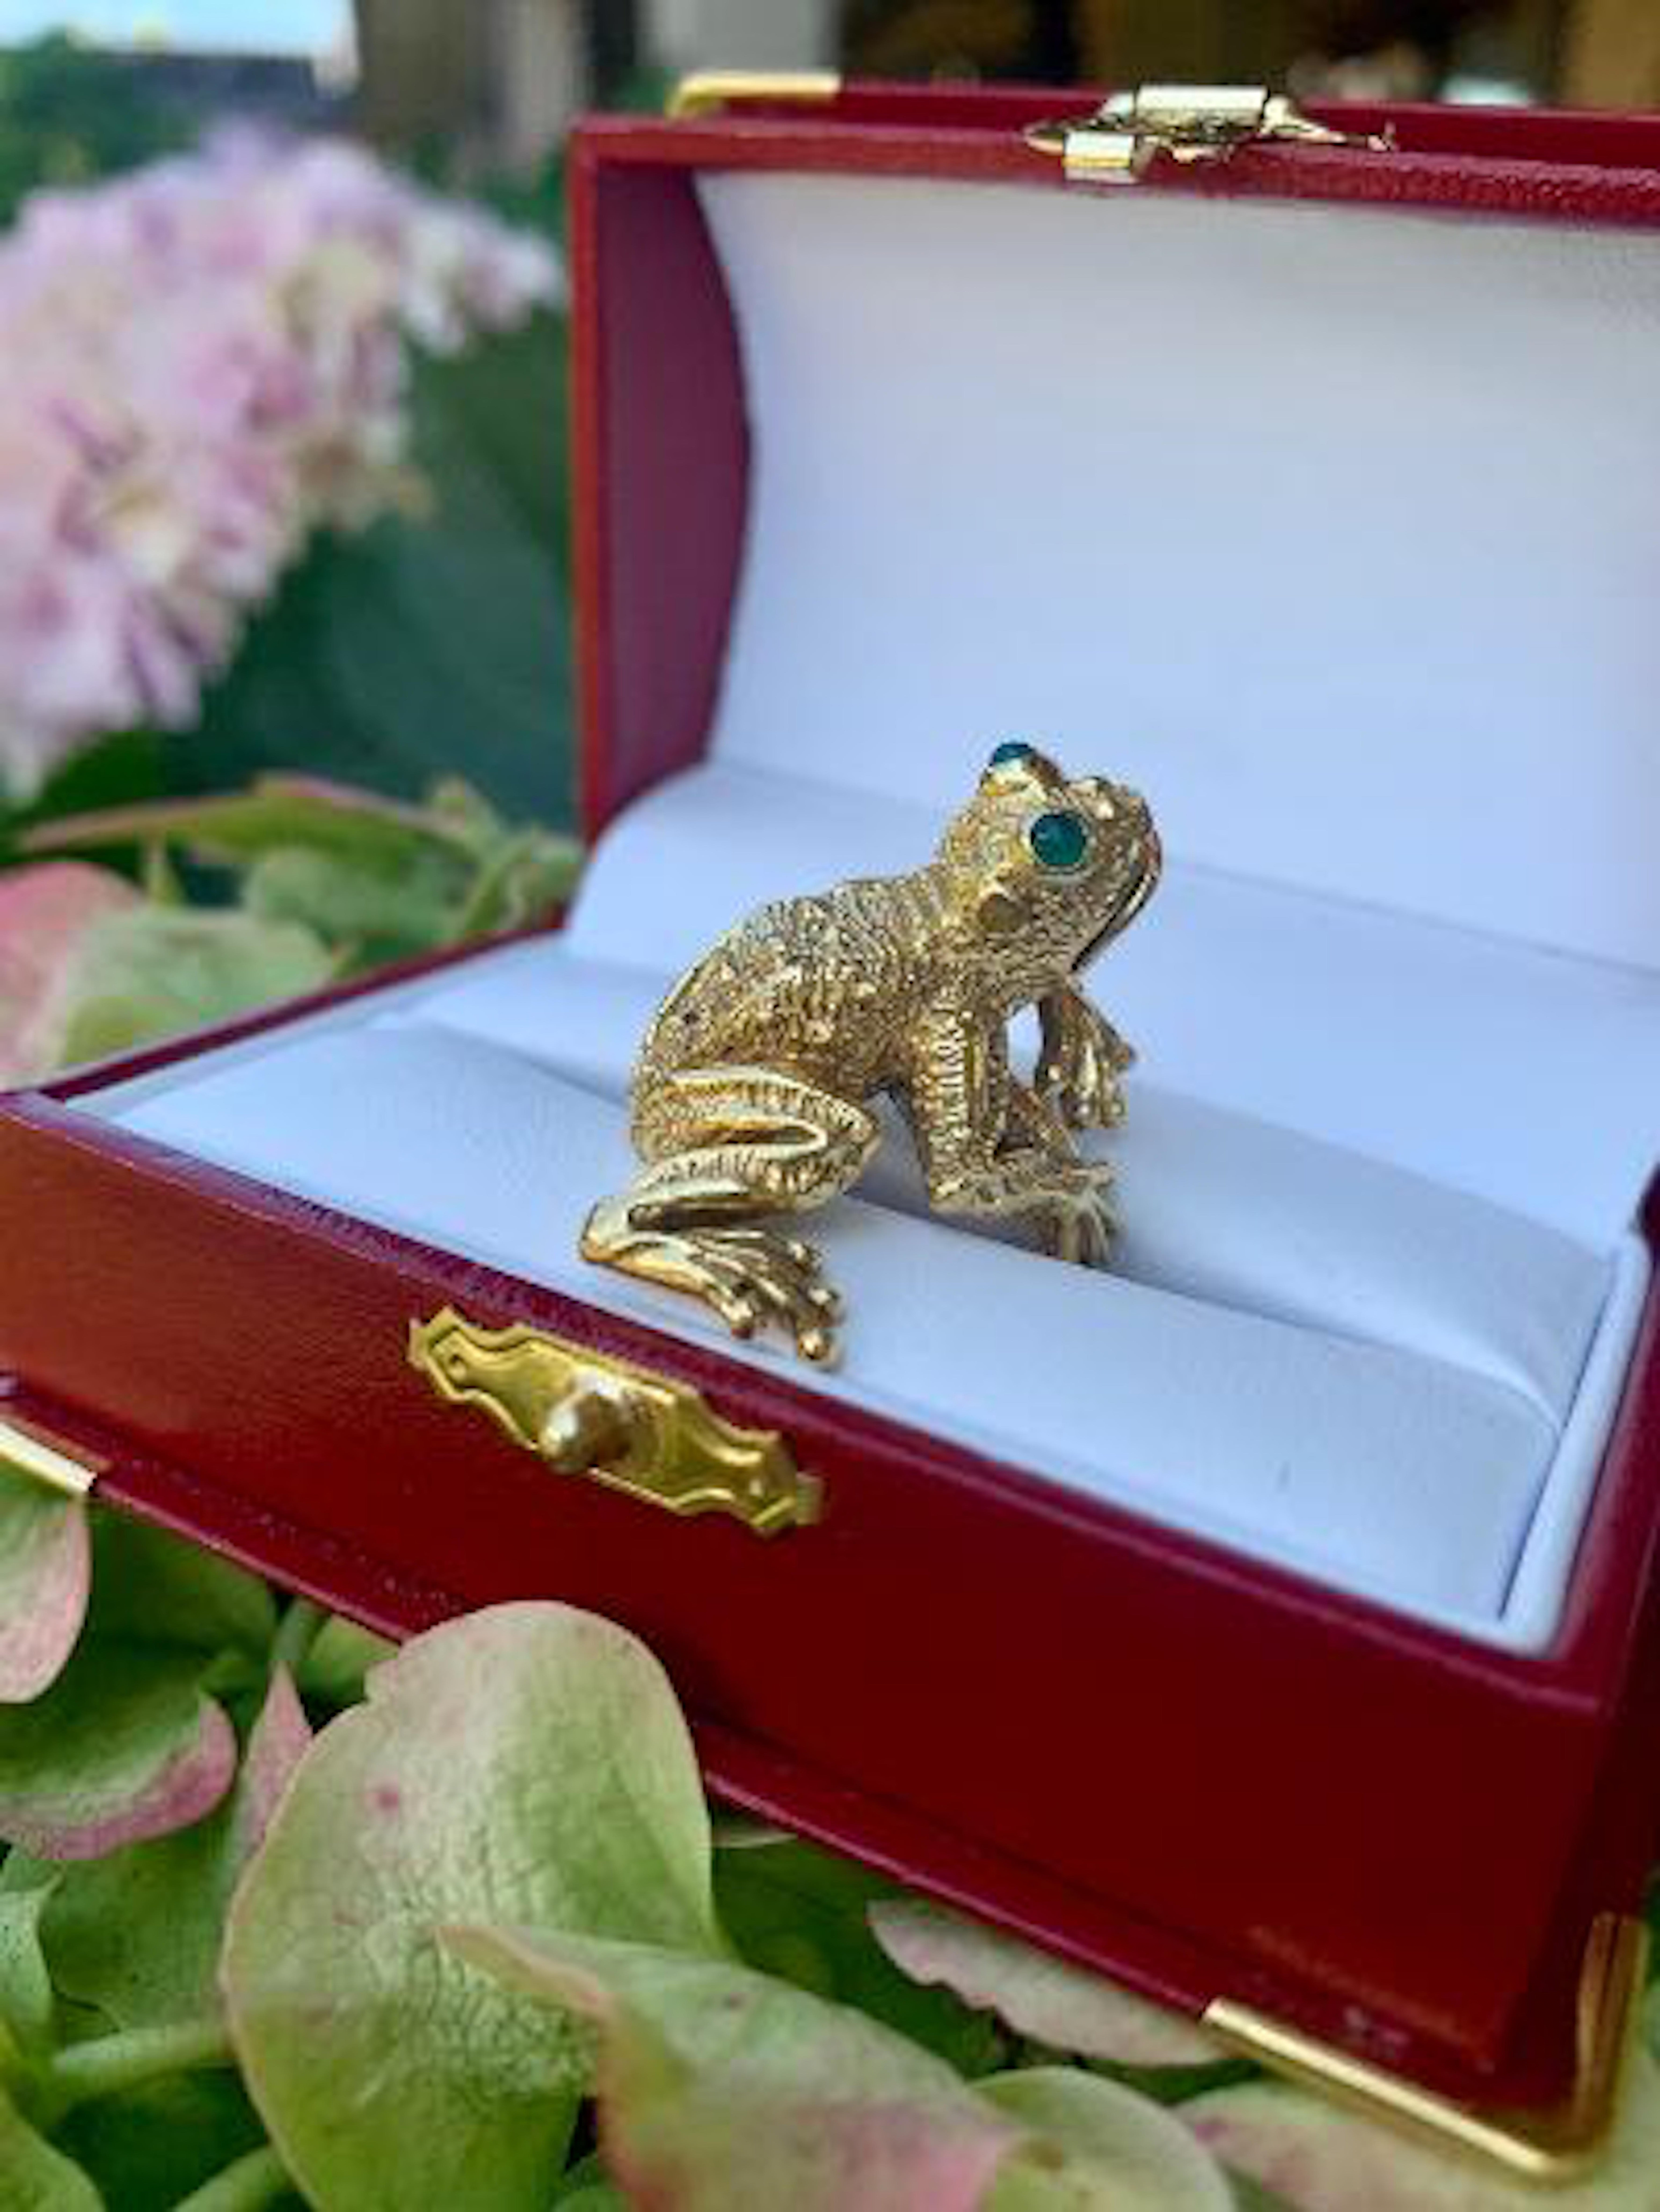 Fabulous and whimsical, hand made designer Kurt Wayne frog ring from the 1970’s. The frog ring is finely detailed in textured and polished heavy 18 karat gold and features green emerald cabochon rounds for eyes.

Designer Kurt Wayne was born in